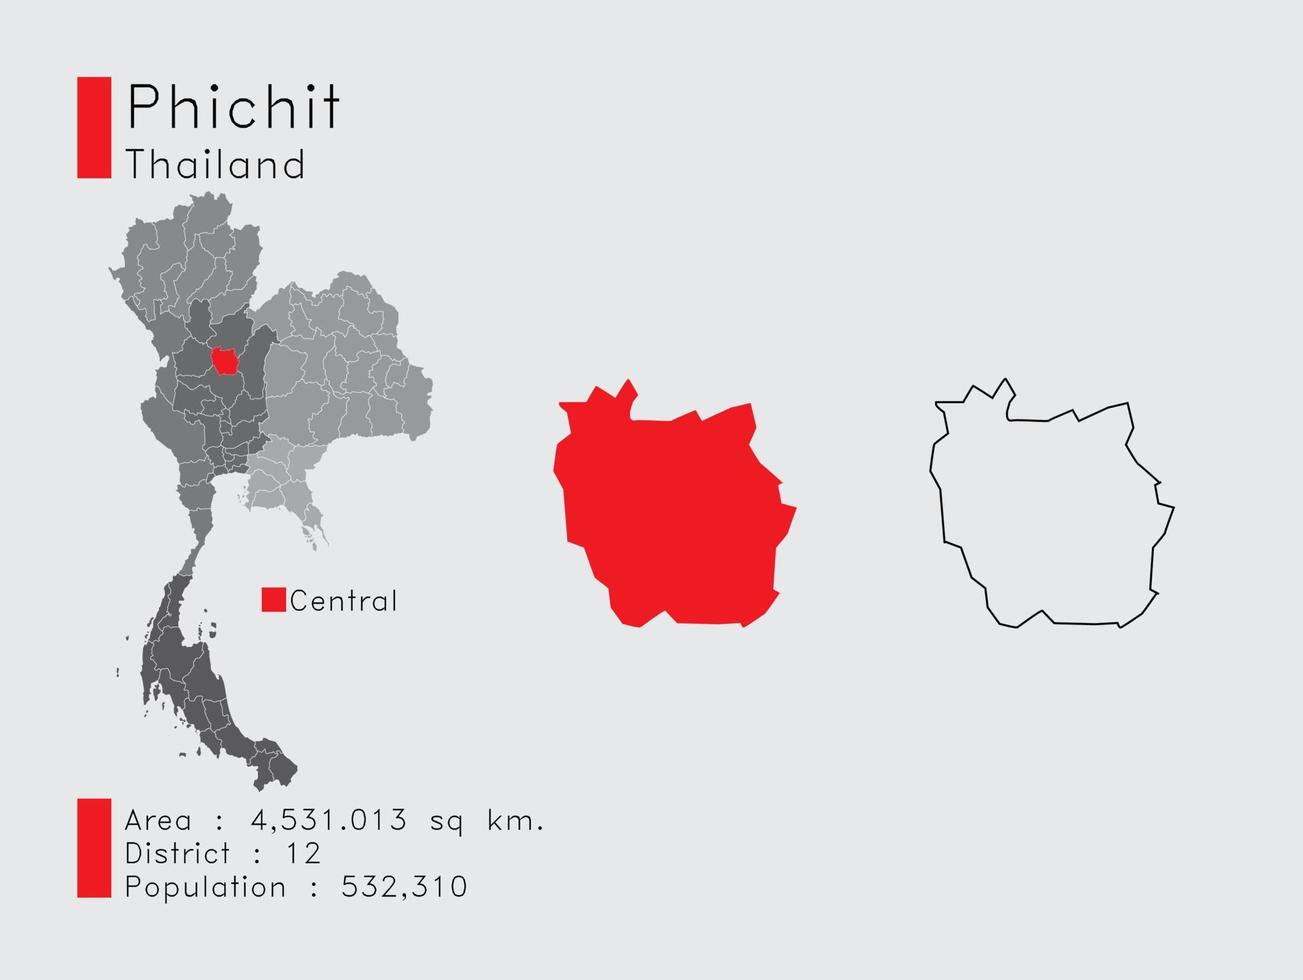 Phichit Position in Thailand A Set of Infographic Elements for the Province. and Area District Population and Outline. Vector with Gray Background.